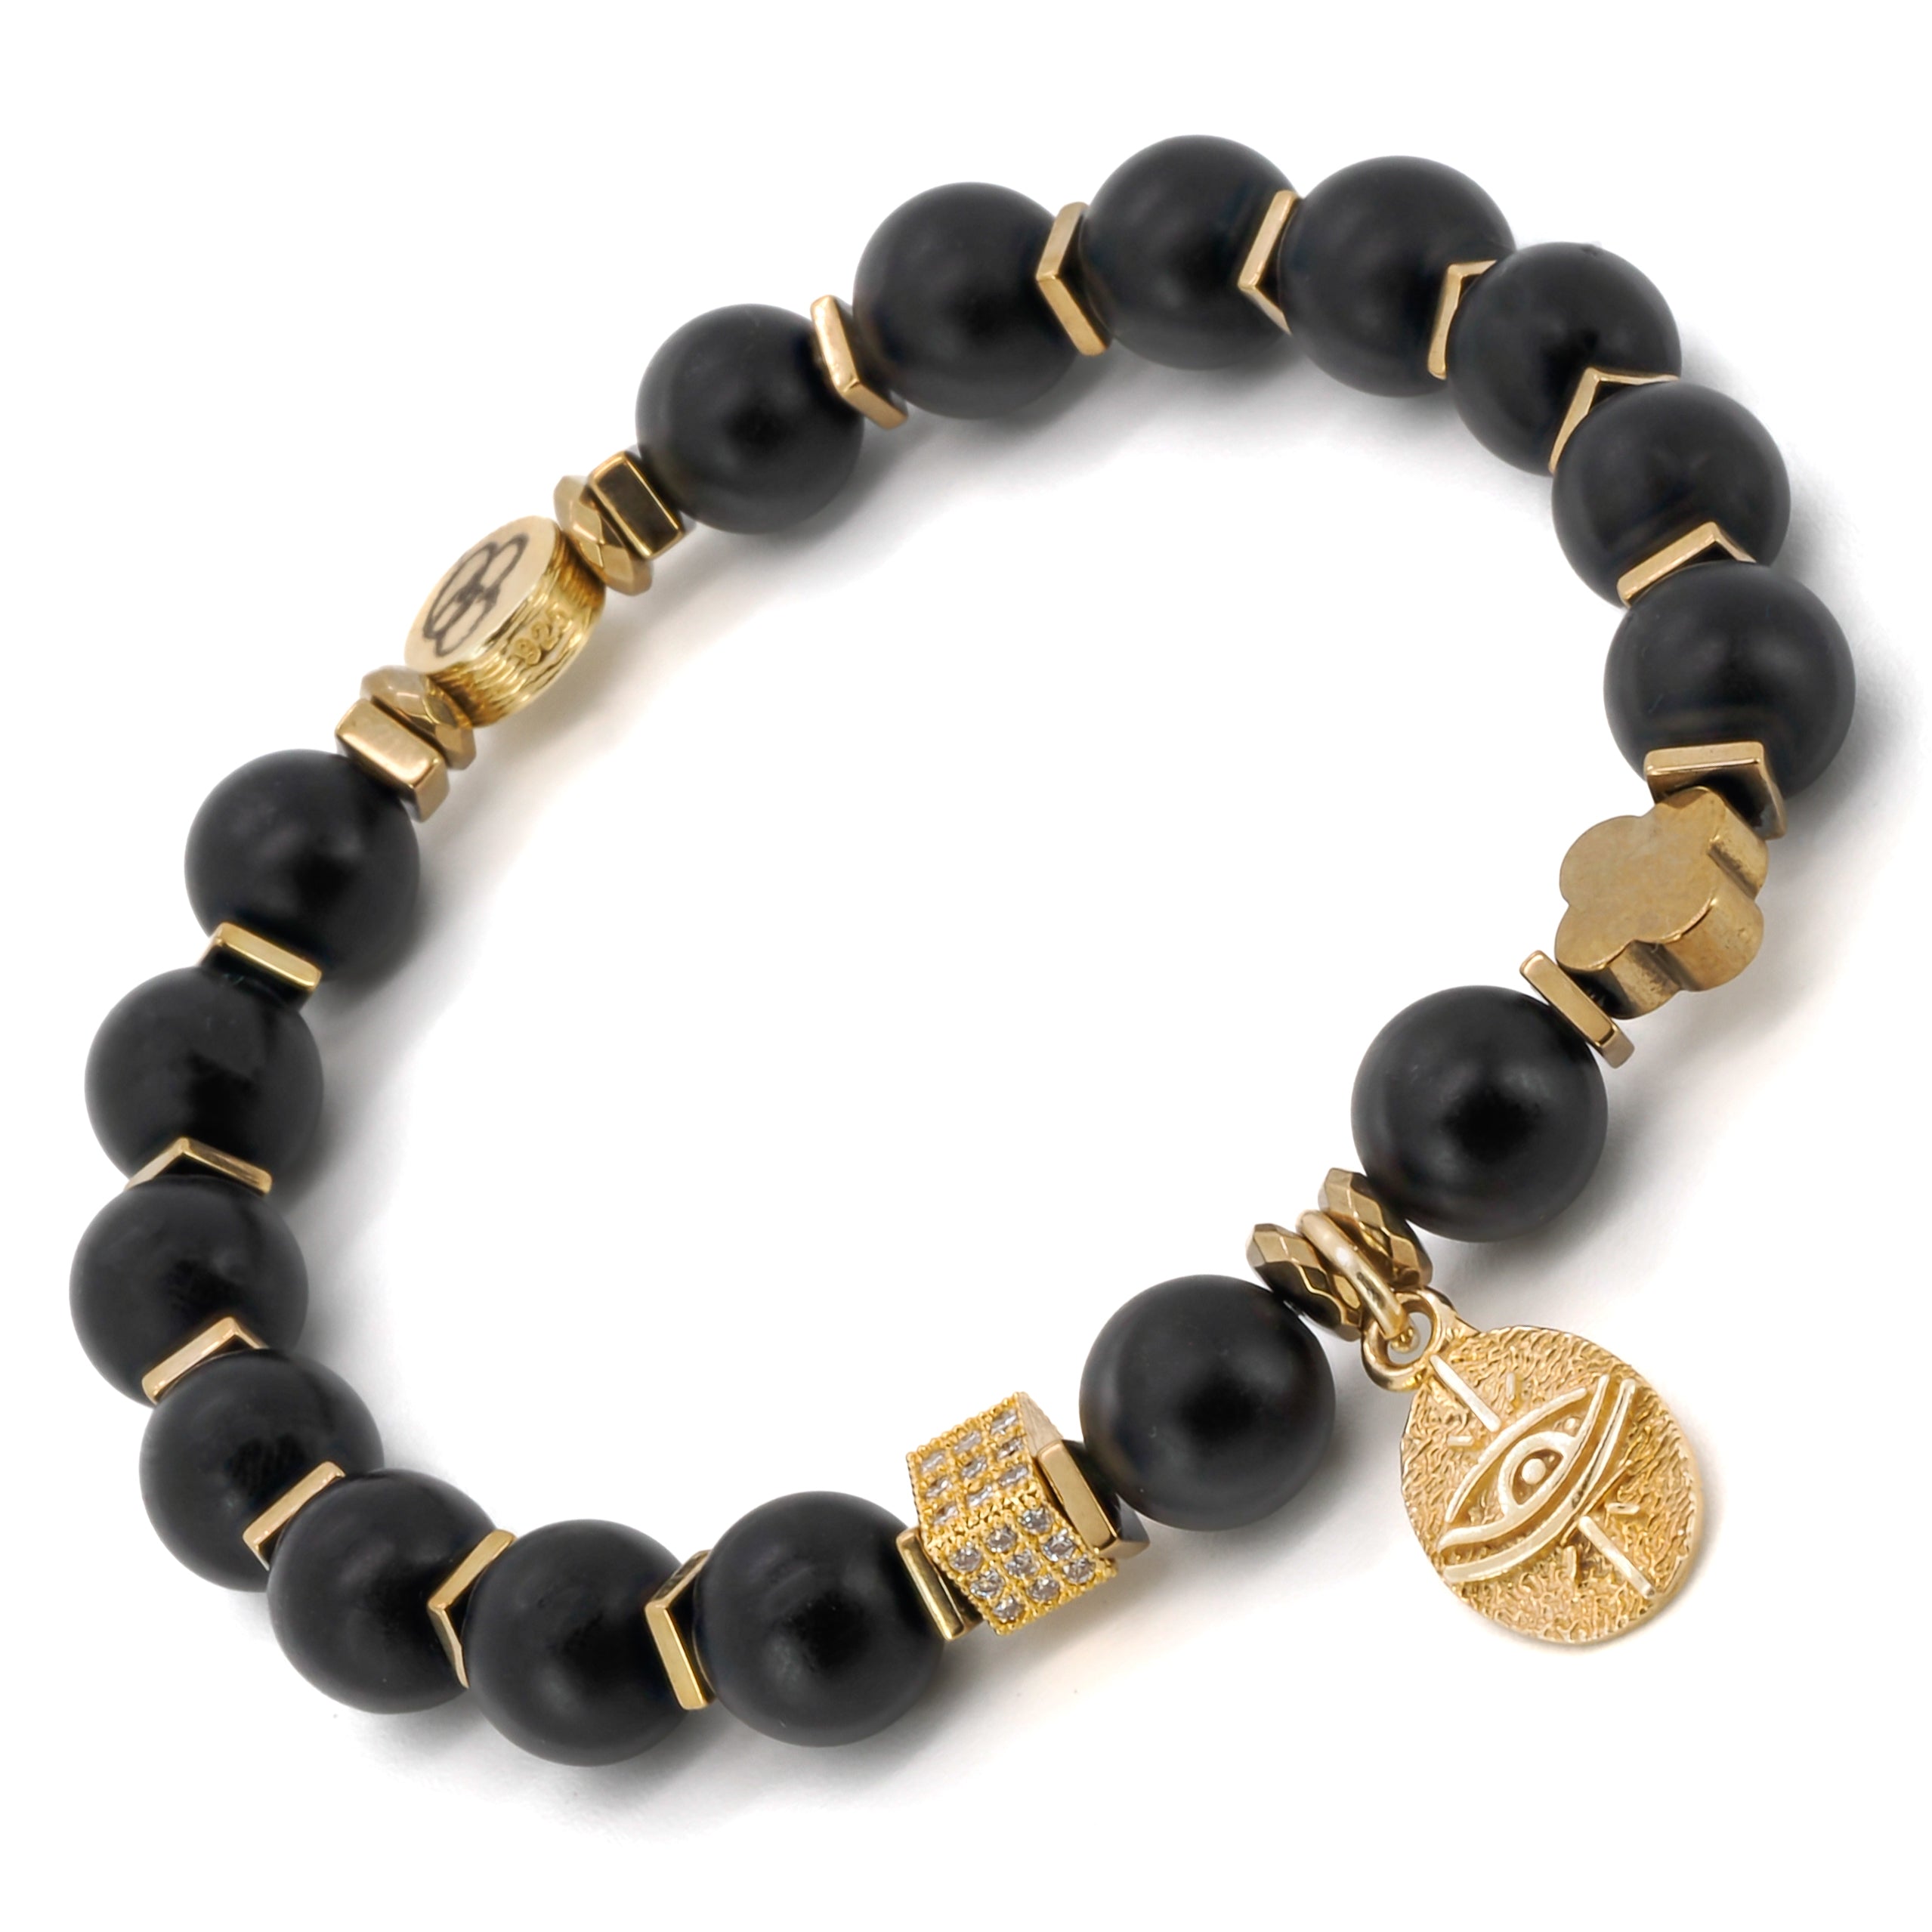 Add a touch of elegance and protection to your style with the Onyx Unique Eye Bracelet, a handcrafted piece of jewelry.